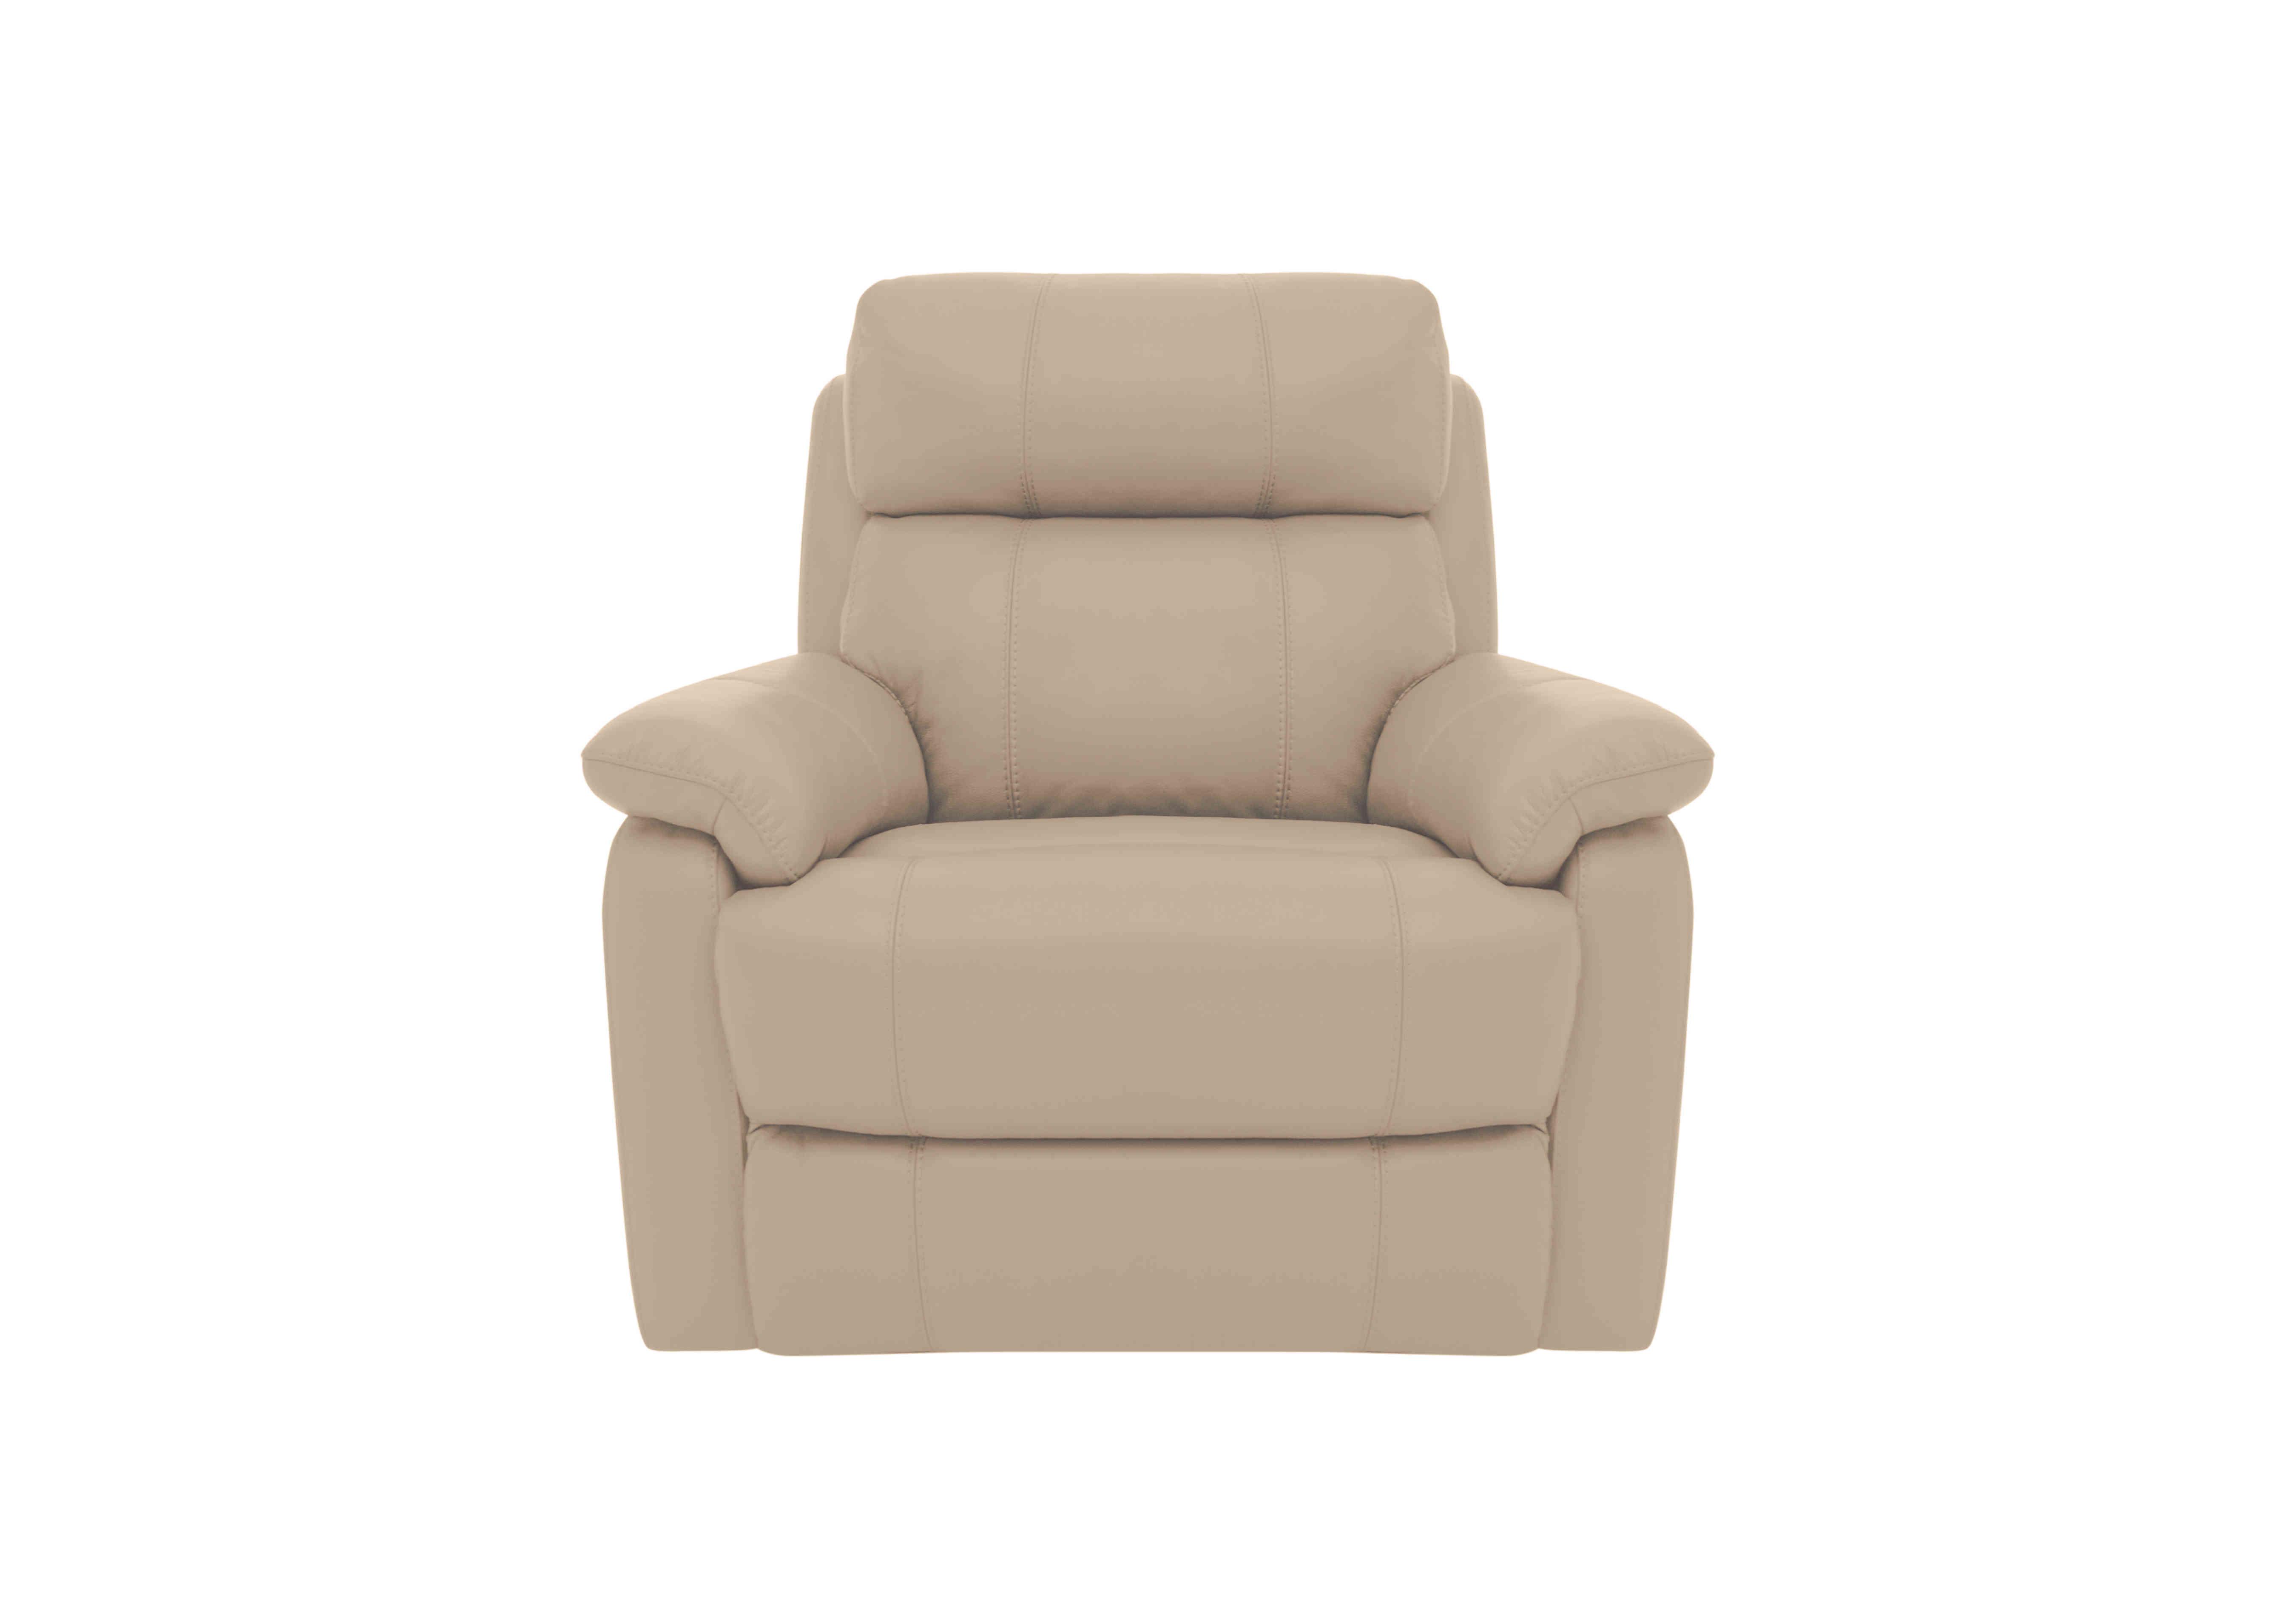 Relax Station Komodo Leather Power Armchair in Bv-039c Pebble on Furniture Village